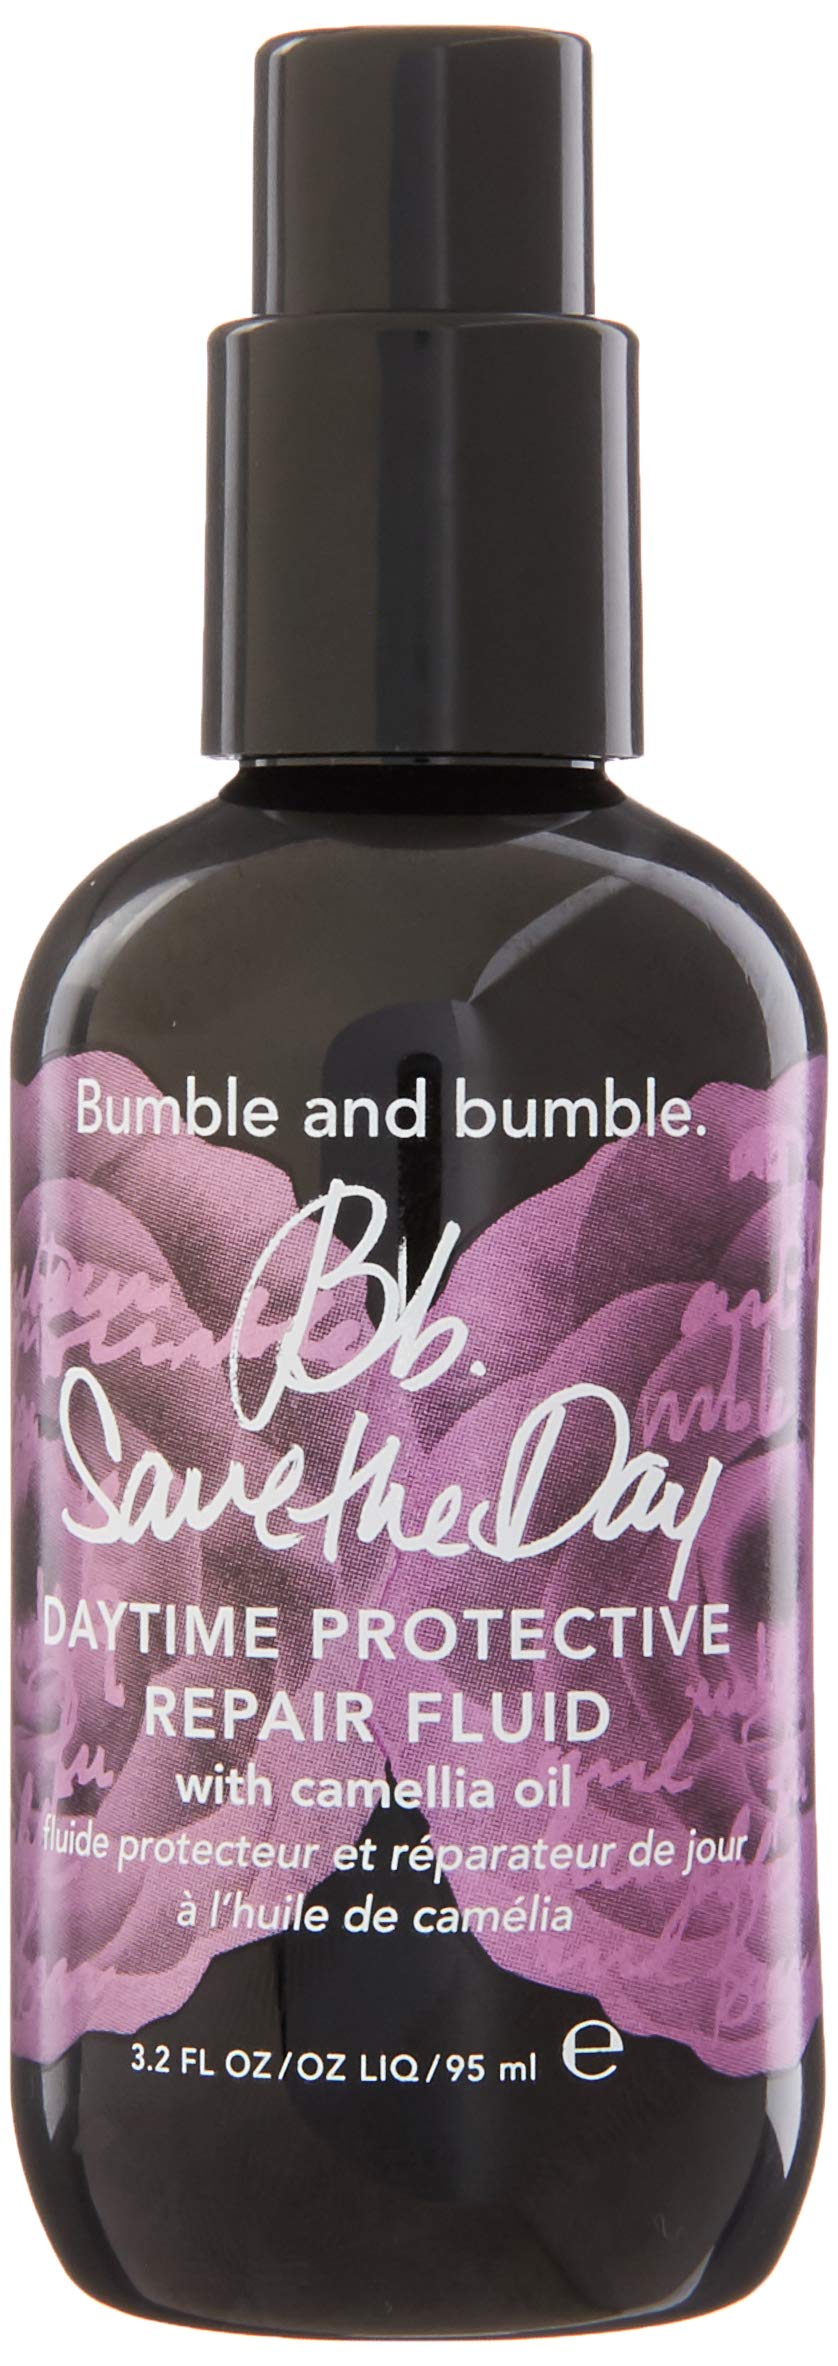 Bumble and Bumble Save The Day Daytime Protective Repair Fluid 95ml